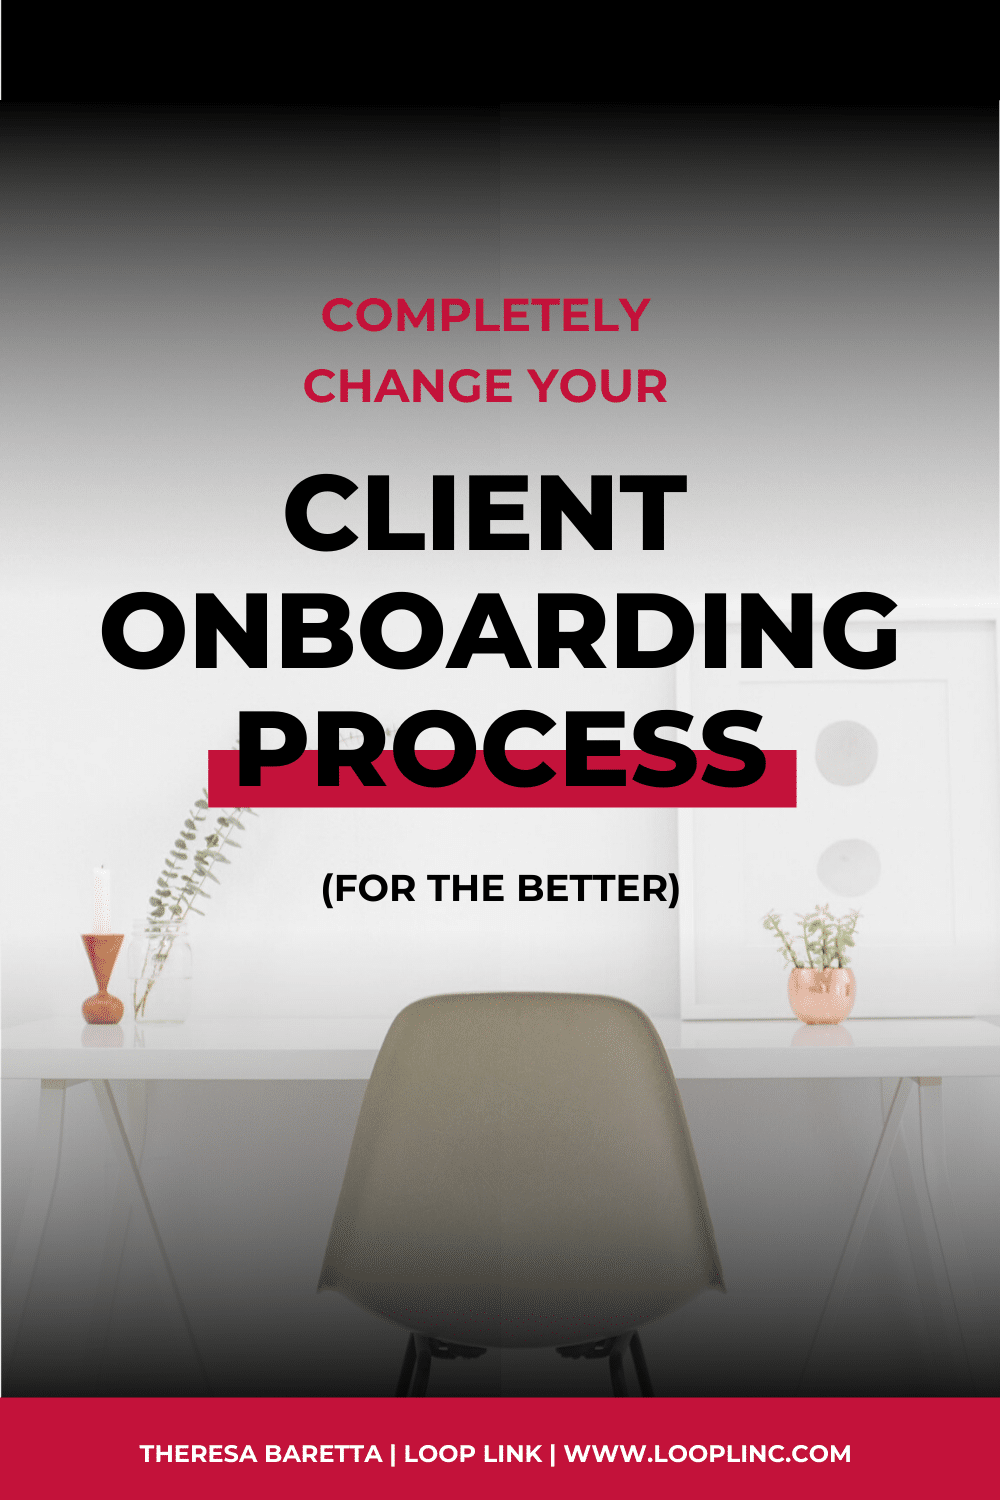 How to Completely Change Your Client Onboarding Process (For the Better)